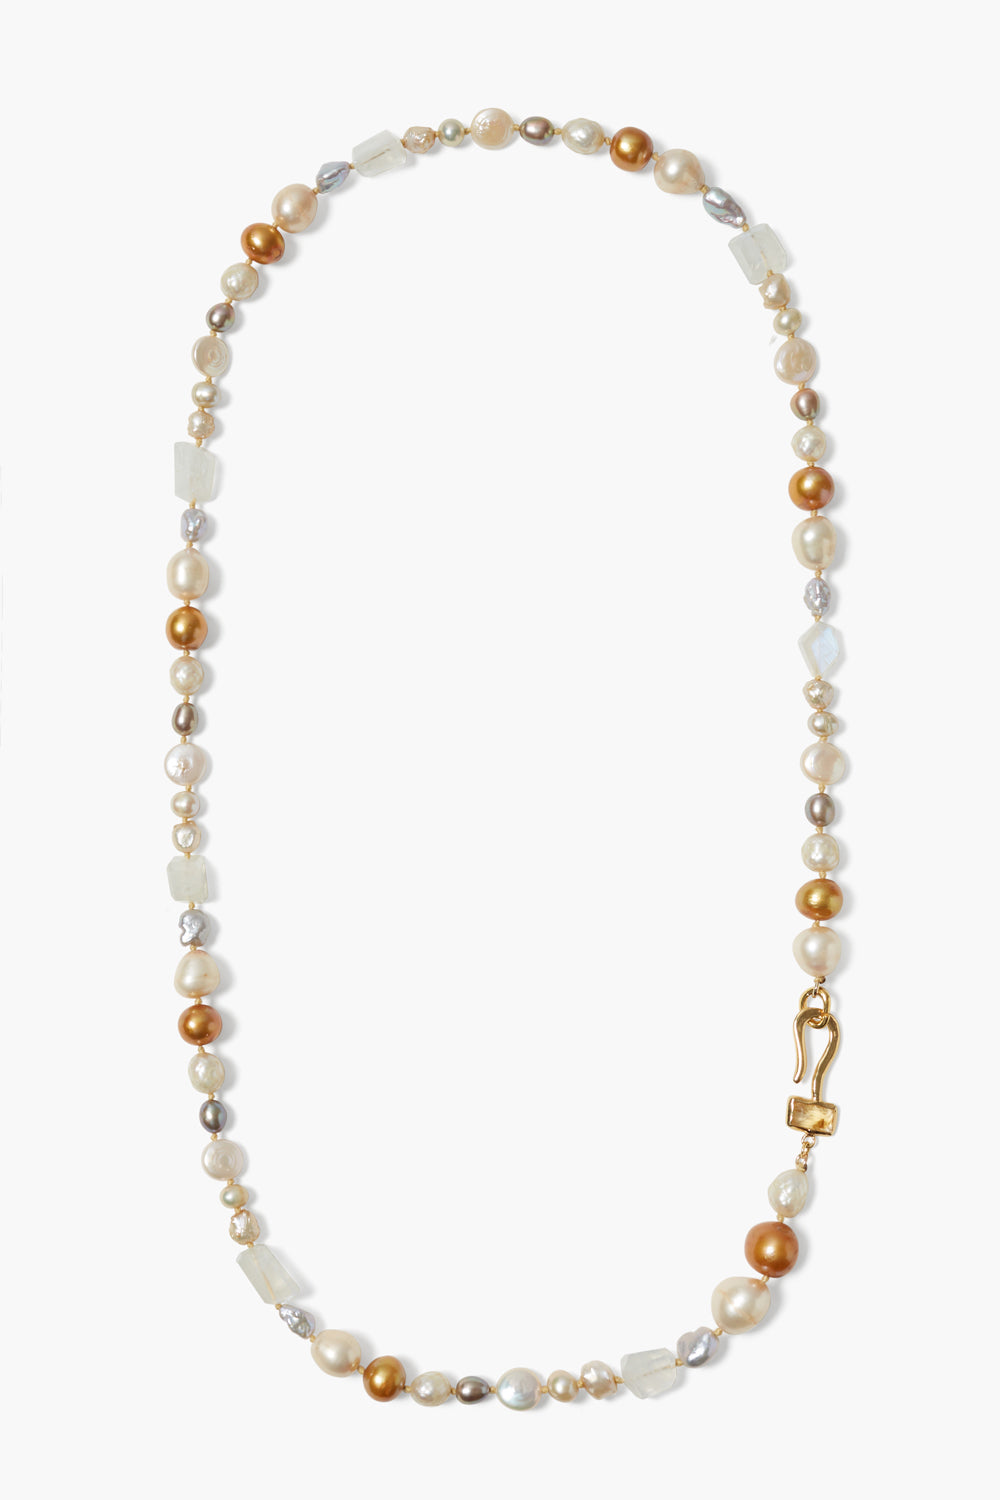 Chan Luu | Odyssey Oceana Necklace | Champagne Pearl Mix